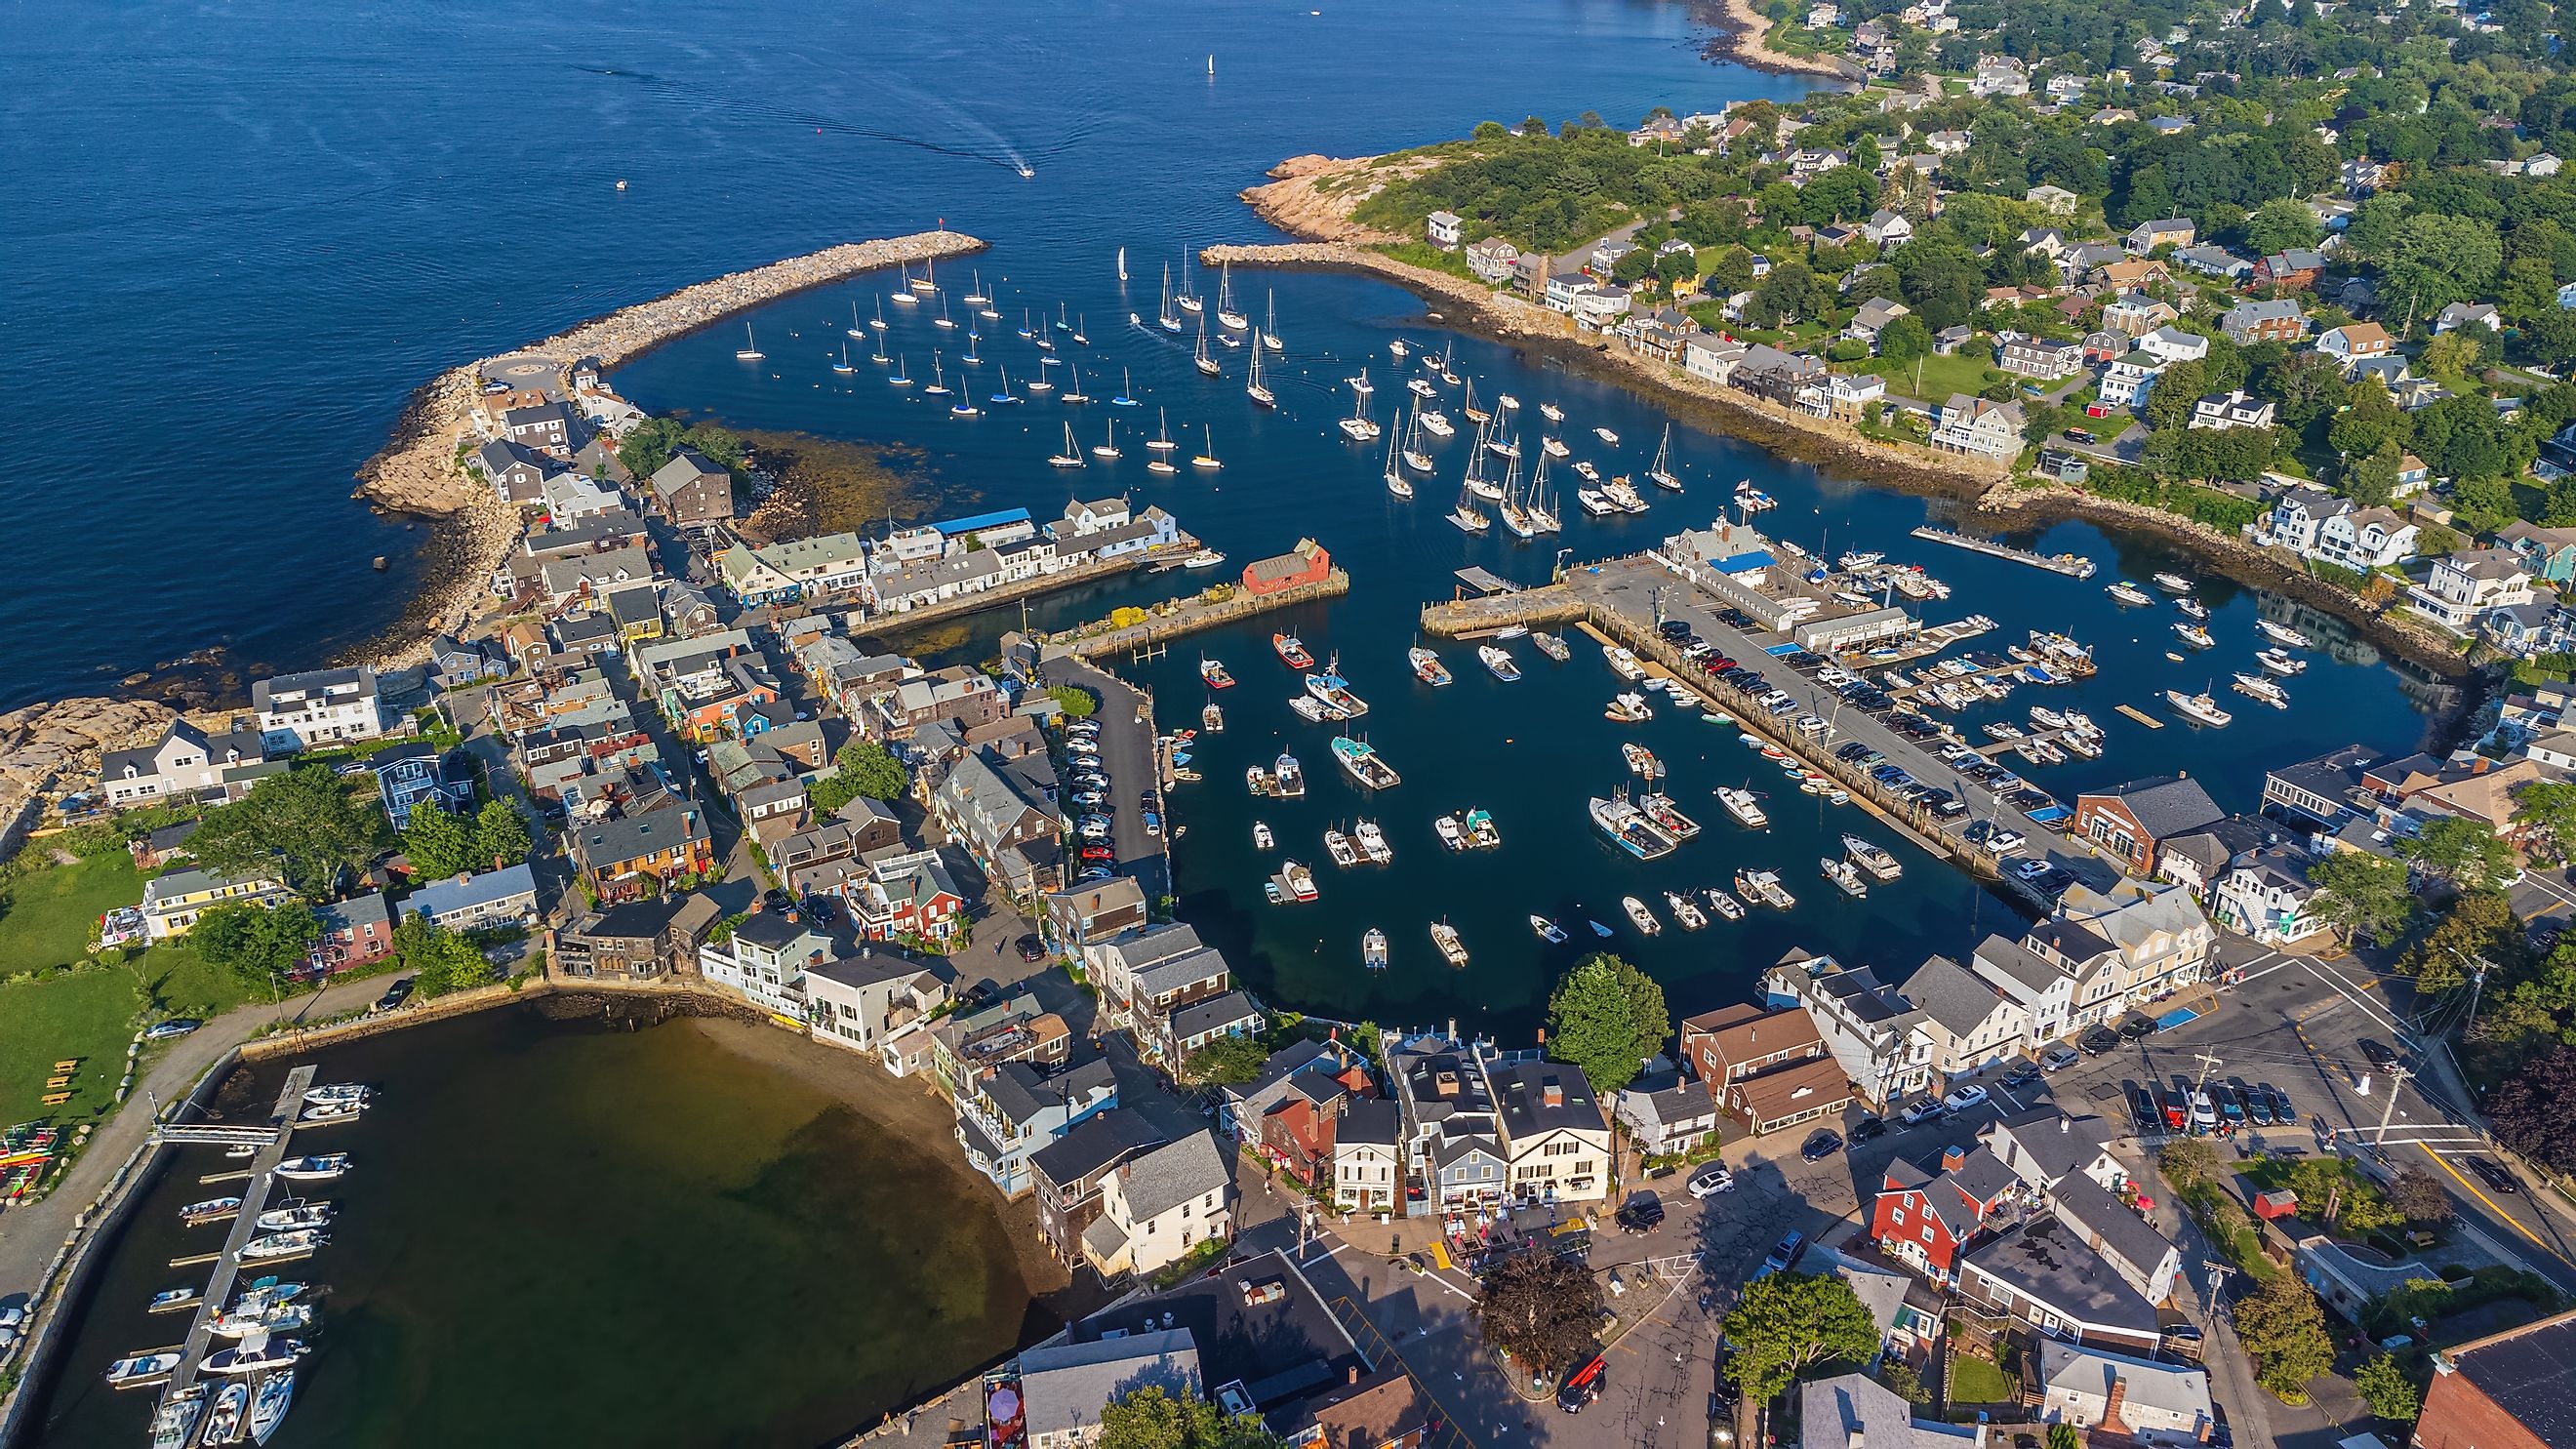 Aerial view of Rockport, Massachusetts